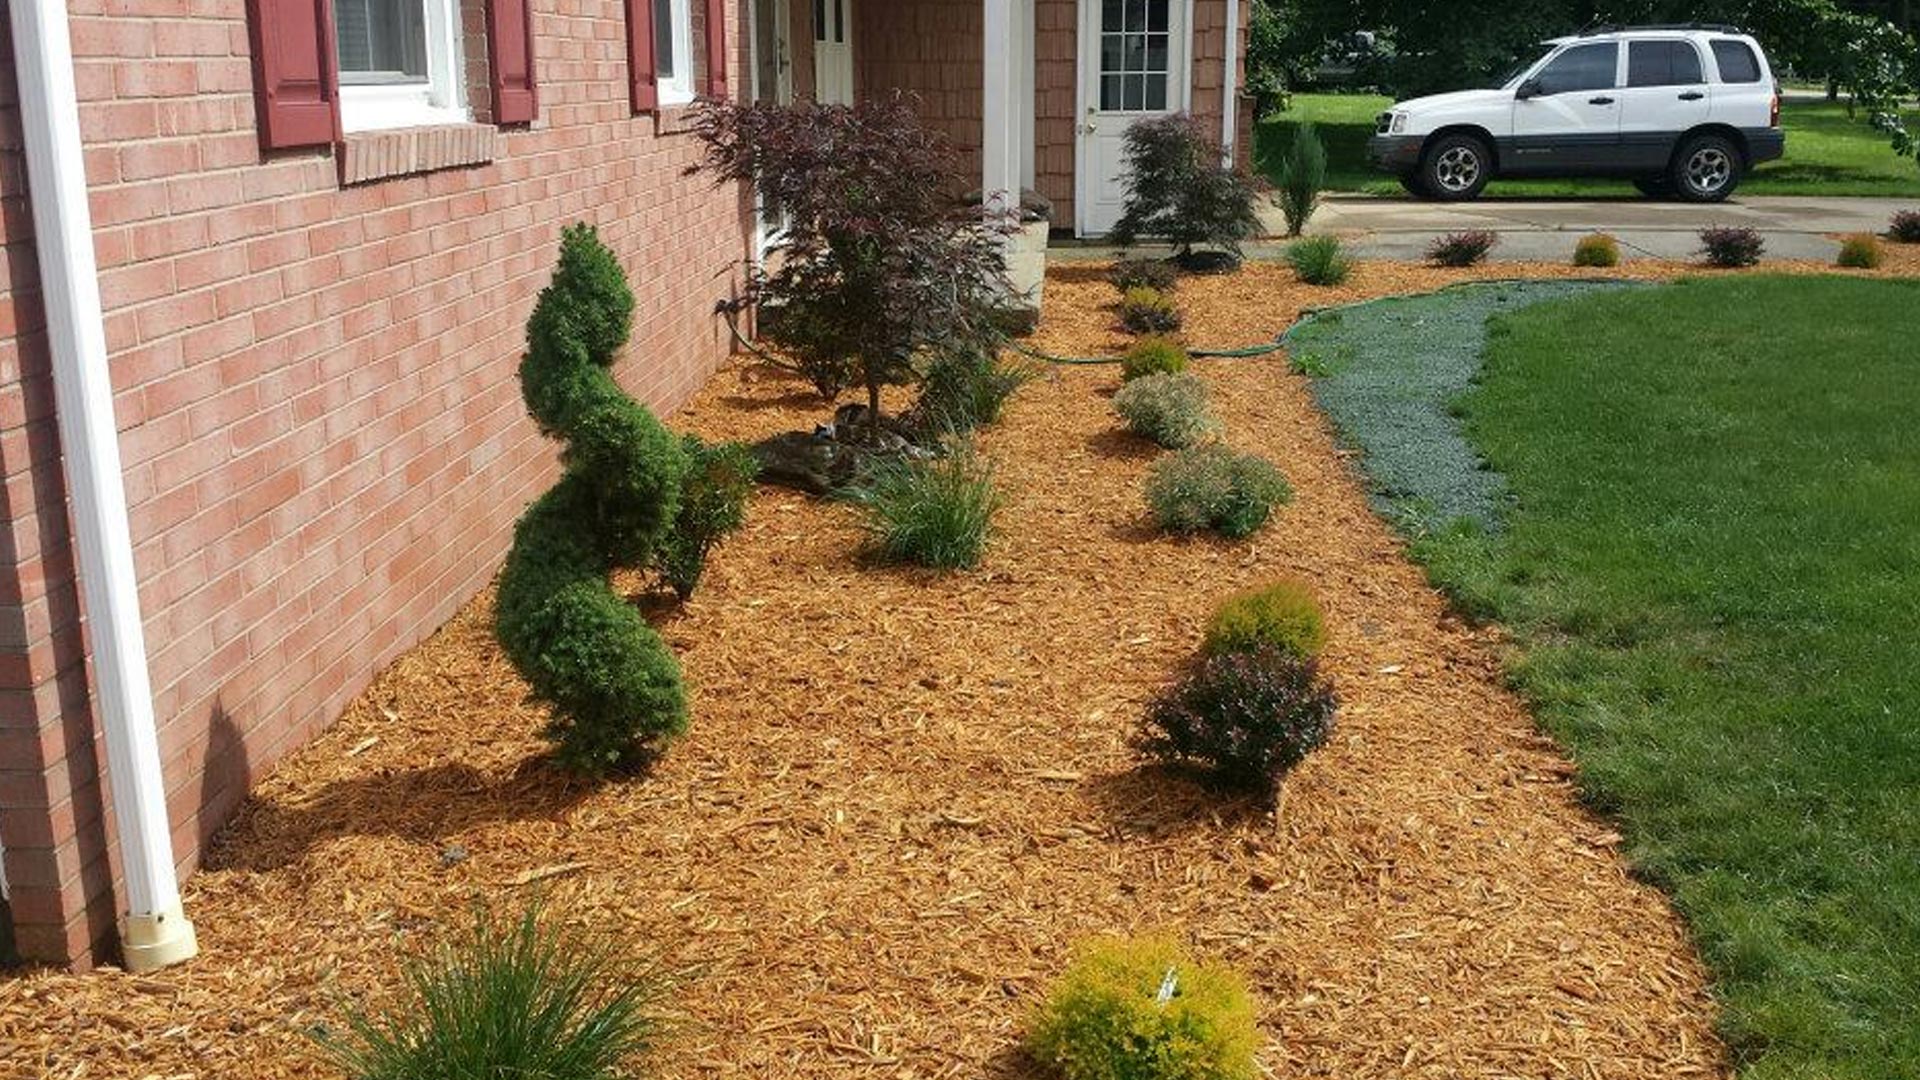 Landscaping installed featuring new plants, shrubs, and mulch at a property in Geneva, OH.